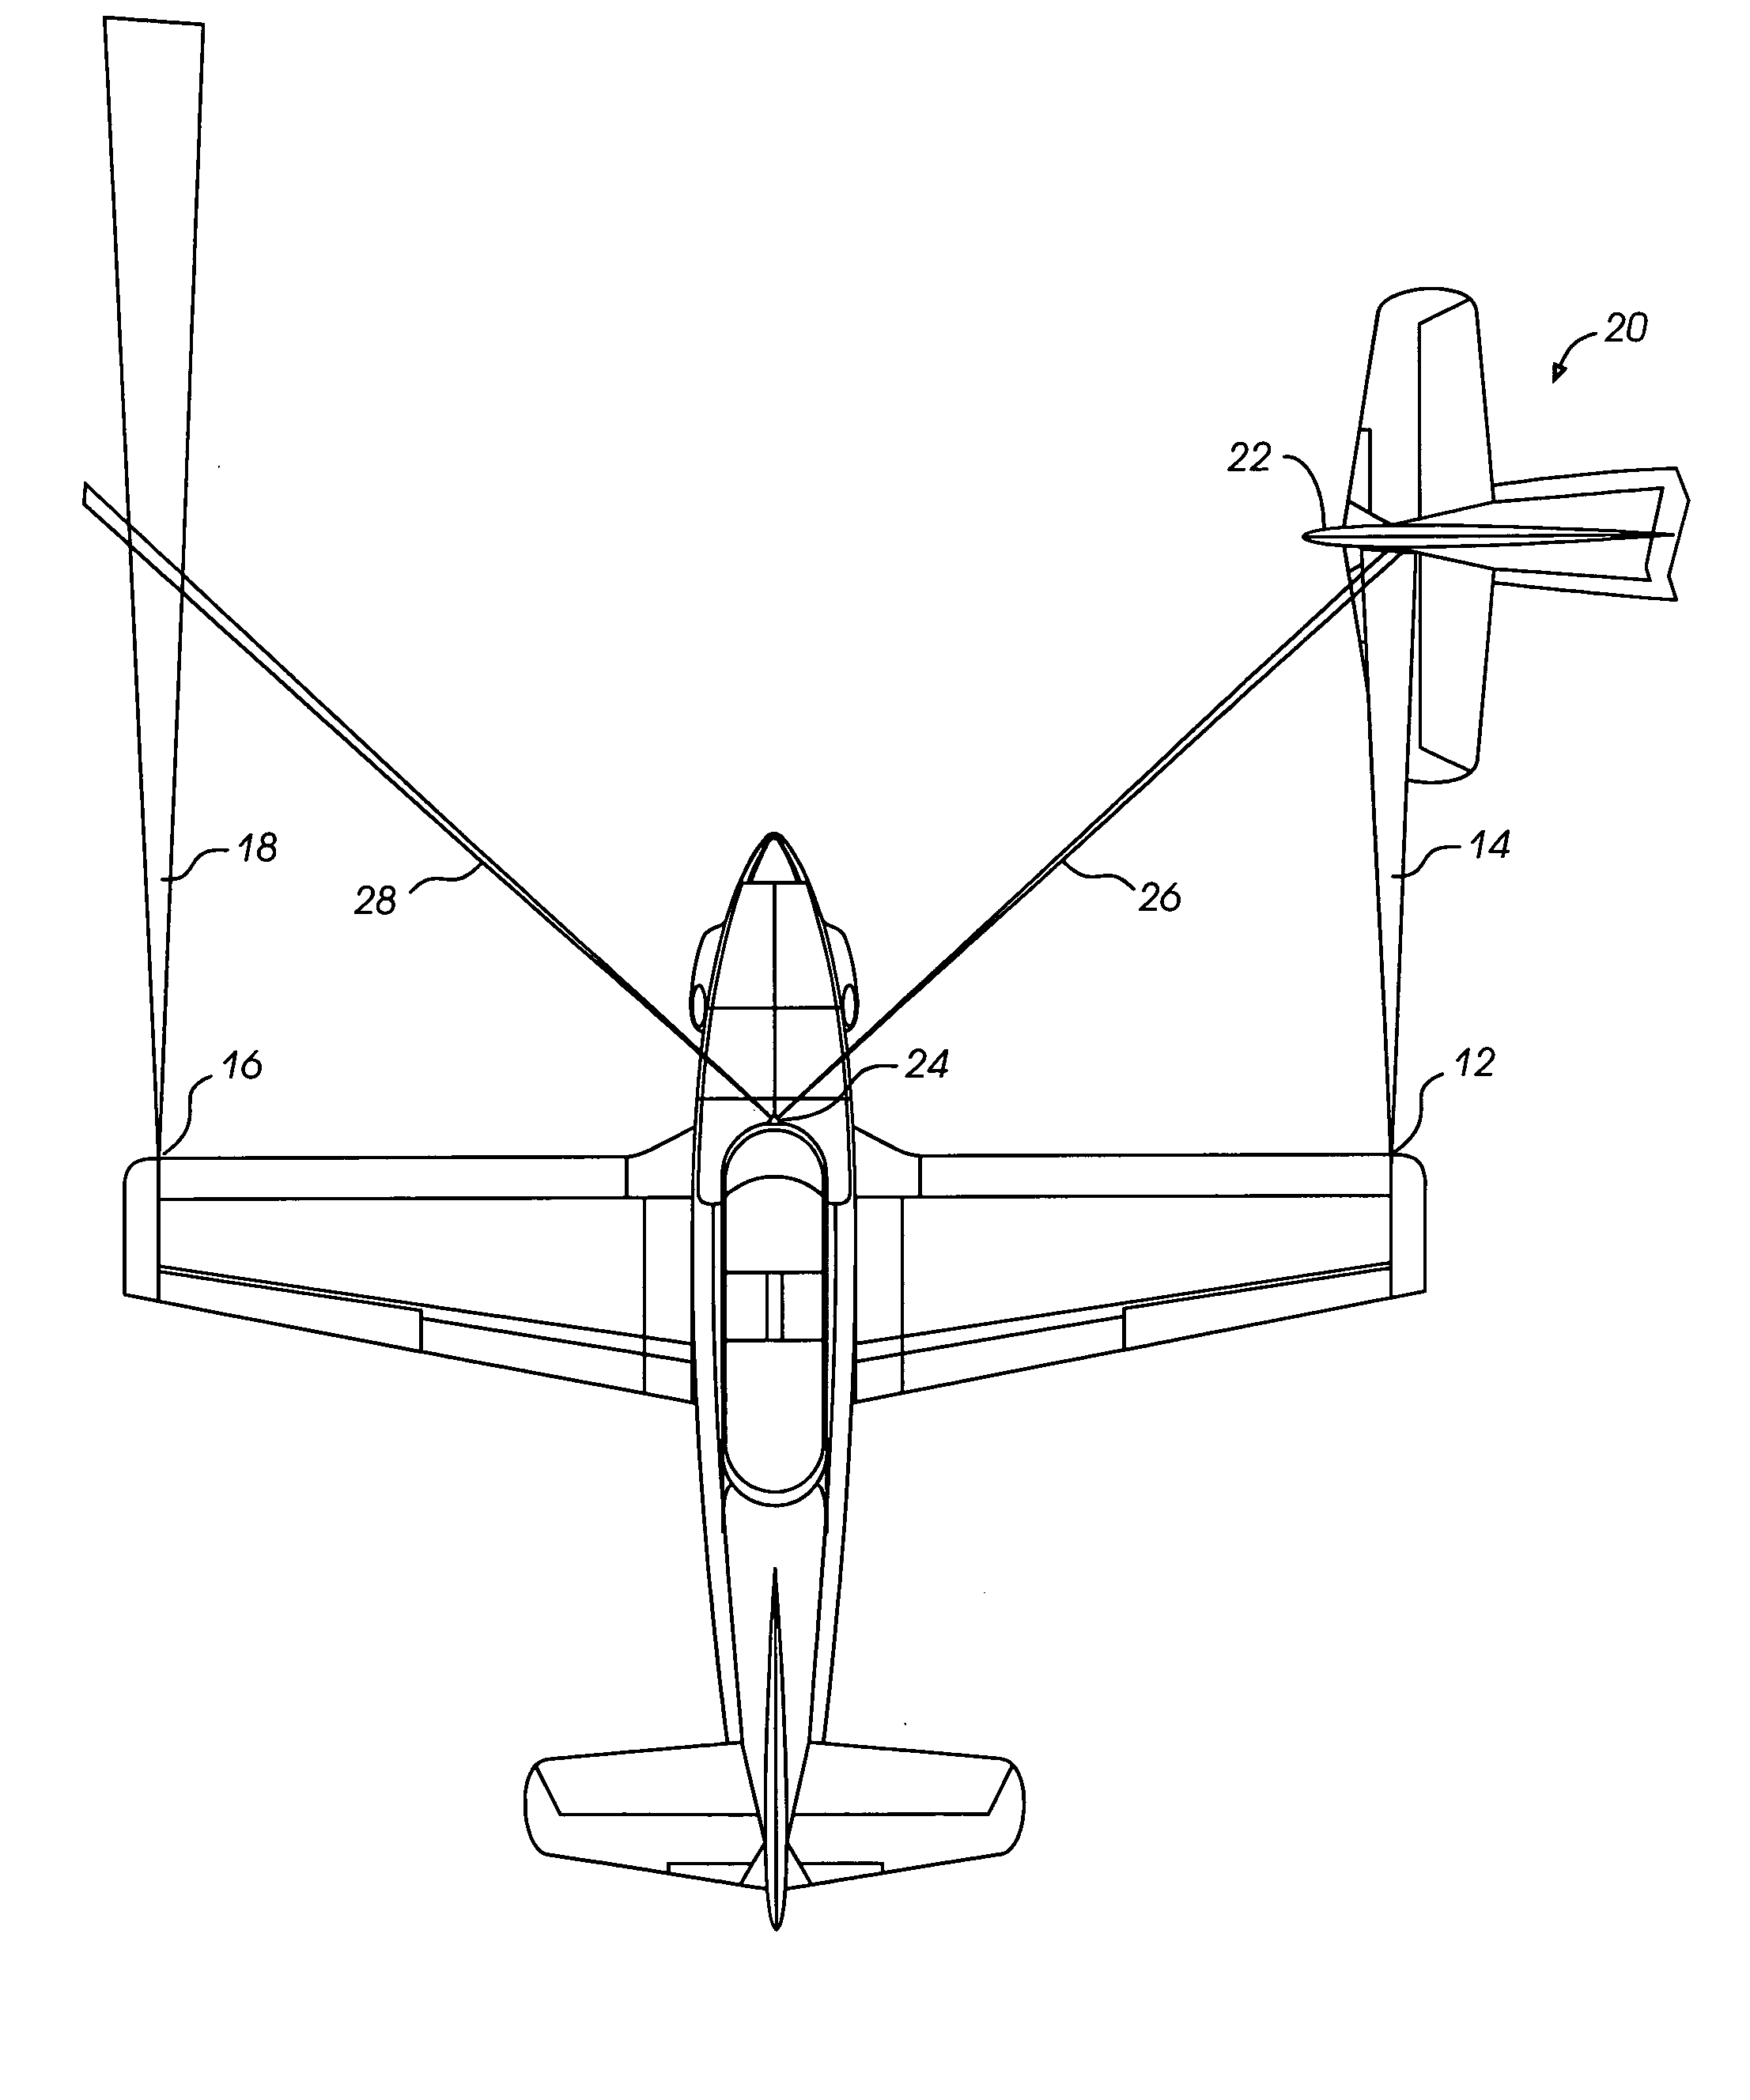 System and method of preventing aircraft wingtip ground incursion